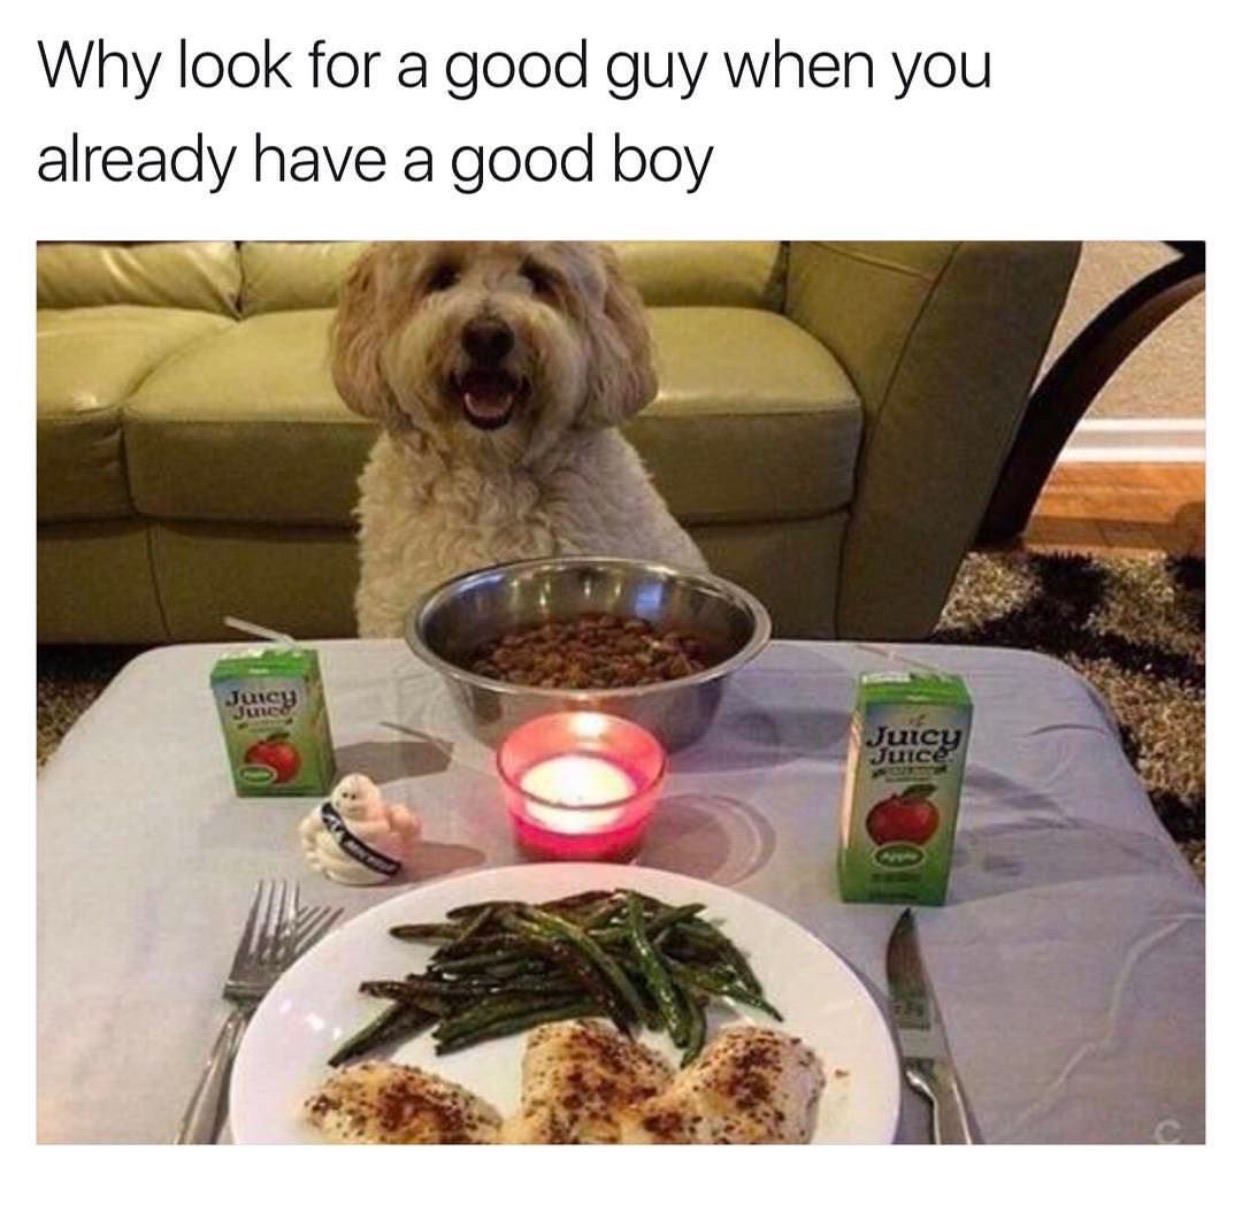 there's no such thing as meme - Why look for a good guy when you already have a good boy Juicy